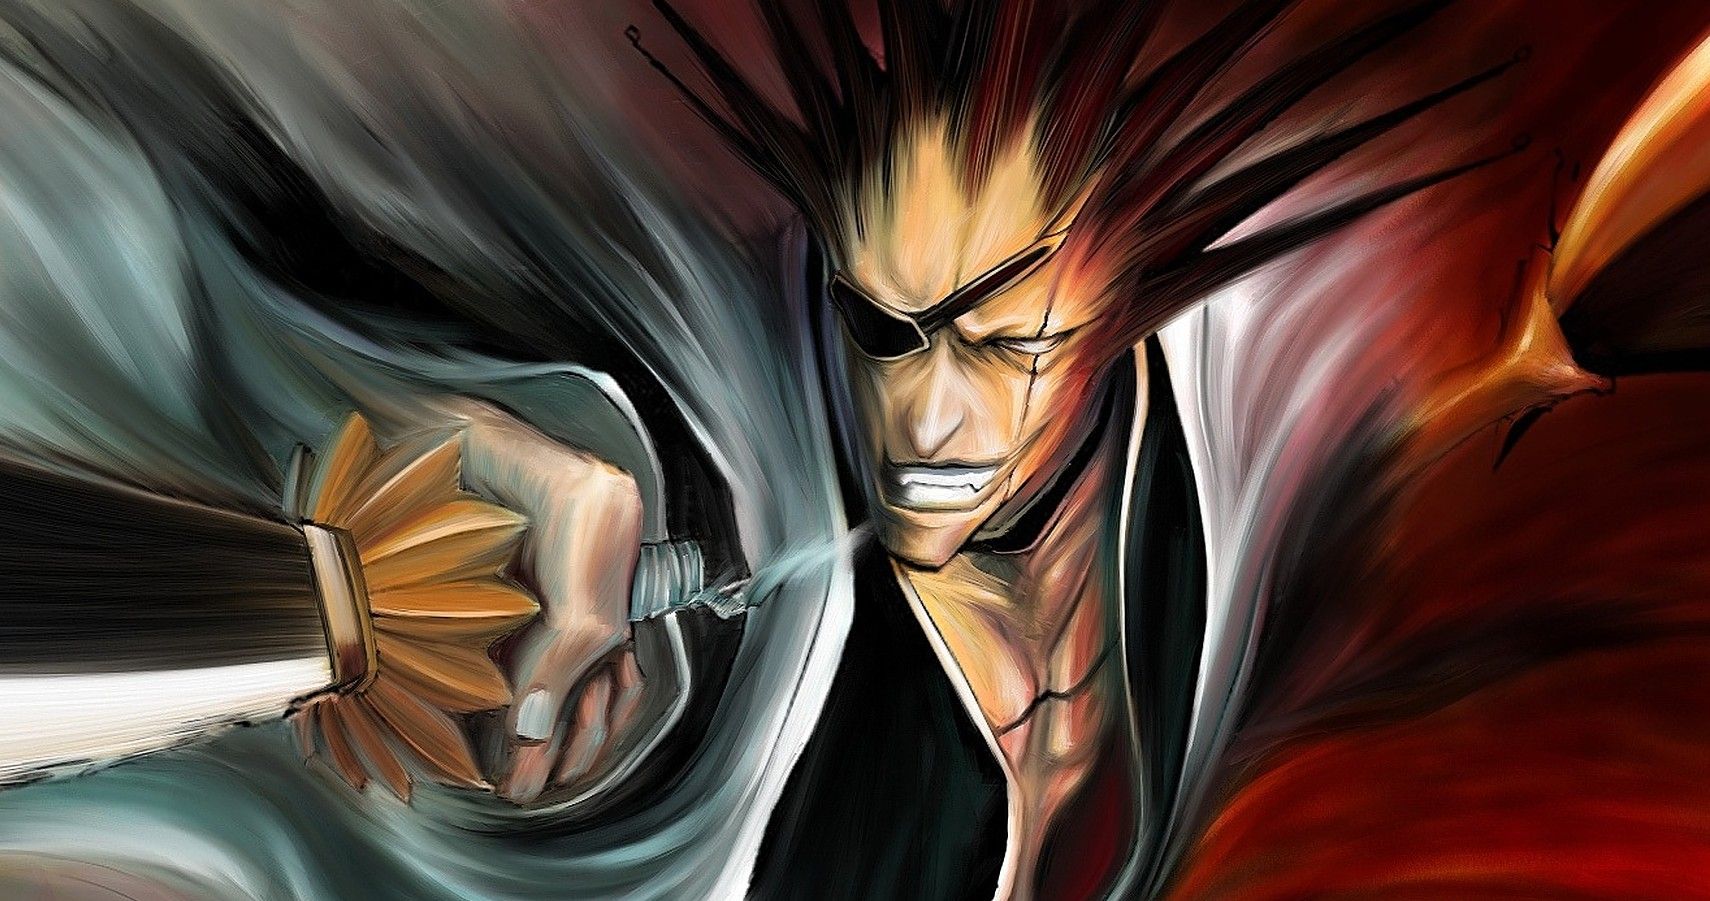 5 Fun Facts You Should Know About Bleach